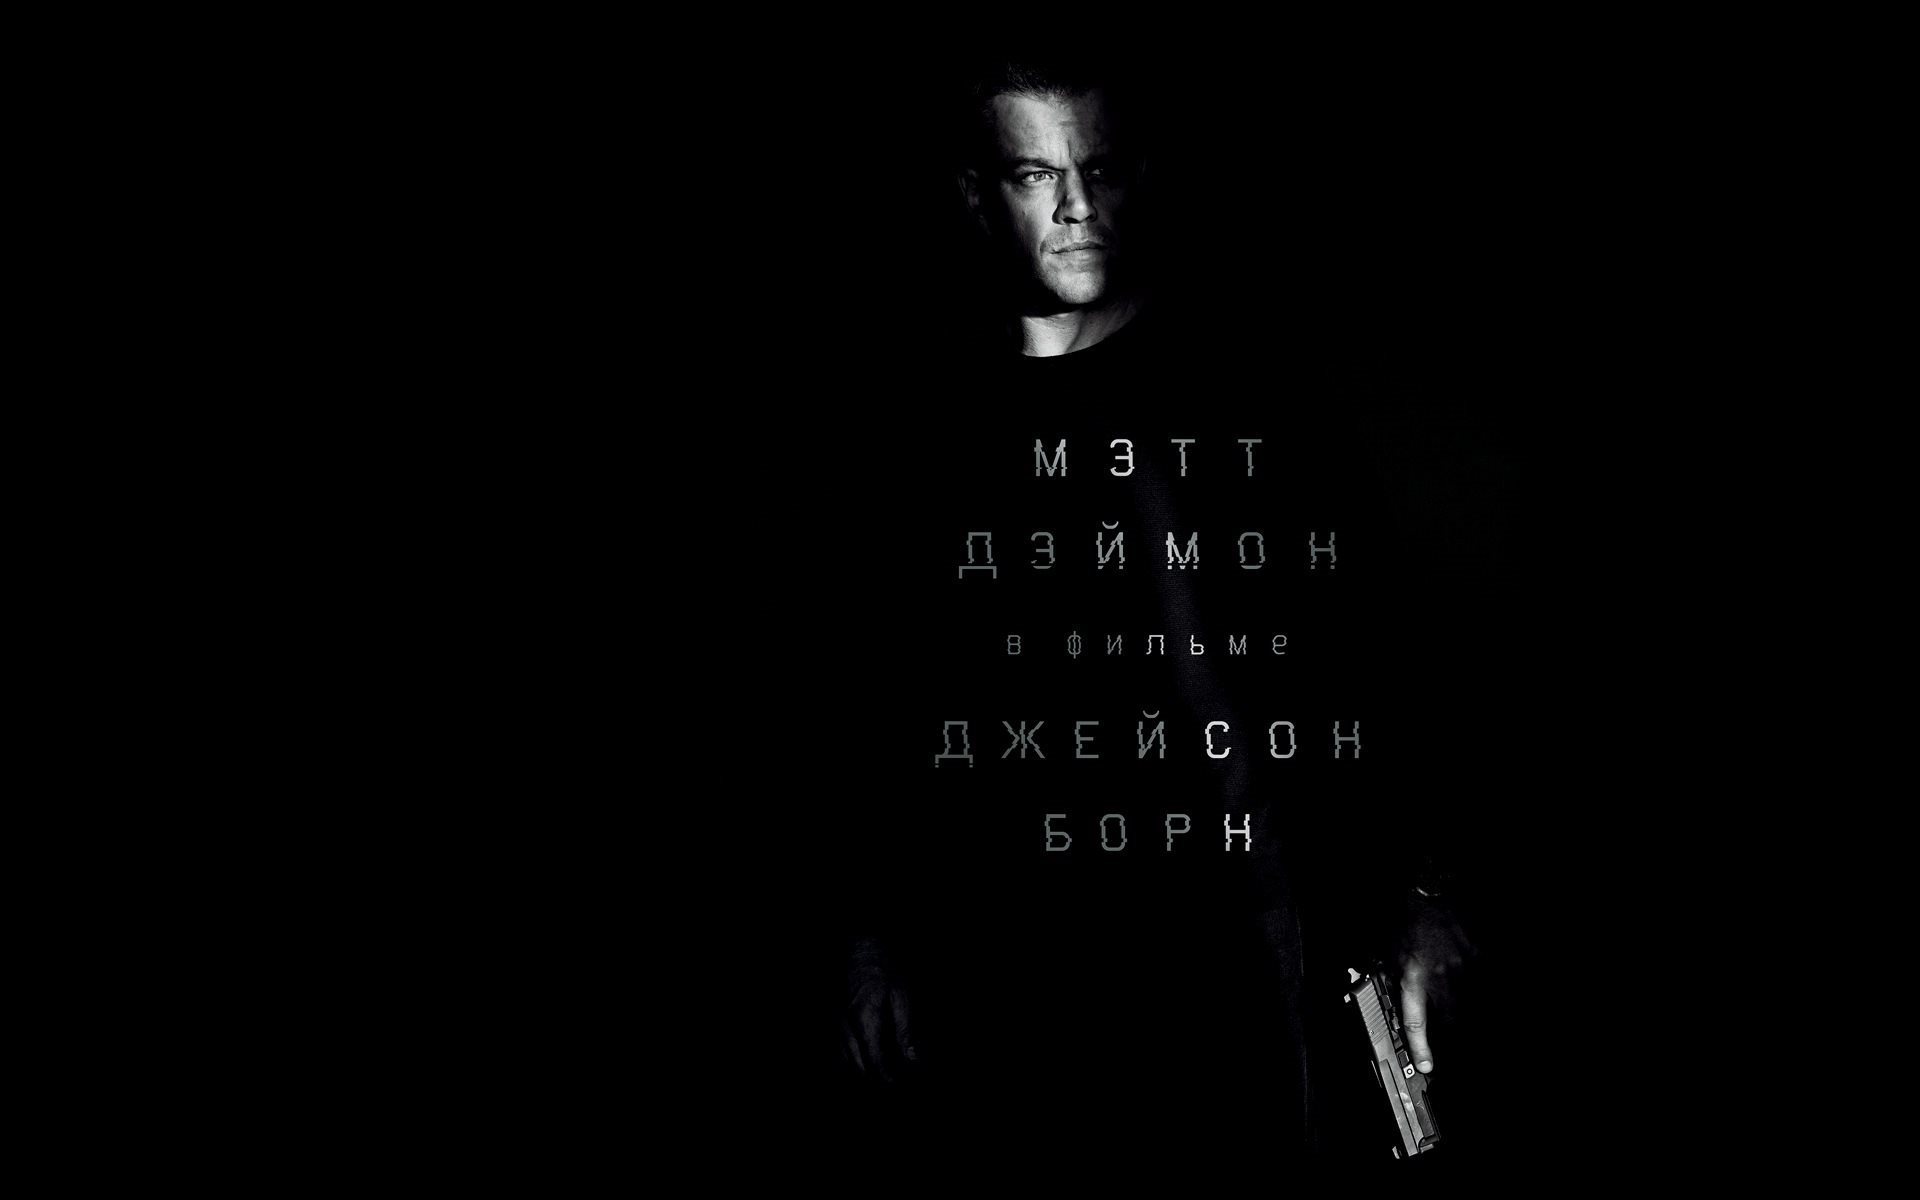 Download wallpaper action, thriller, jason bourne, poster, matt damon, movies for desktop with resolution 1920x1200. High Quality HD picture wallpaper